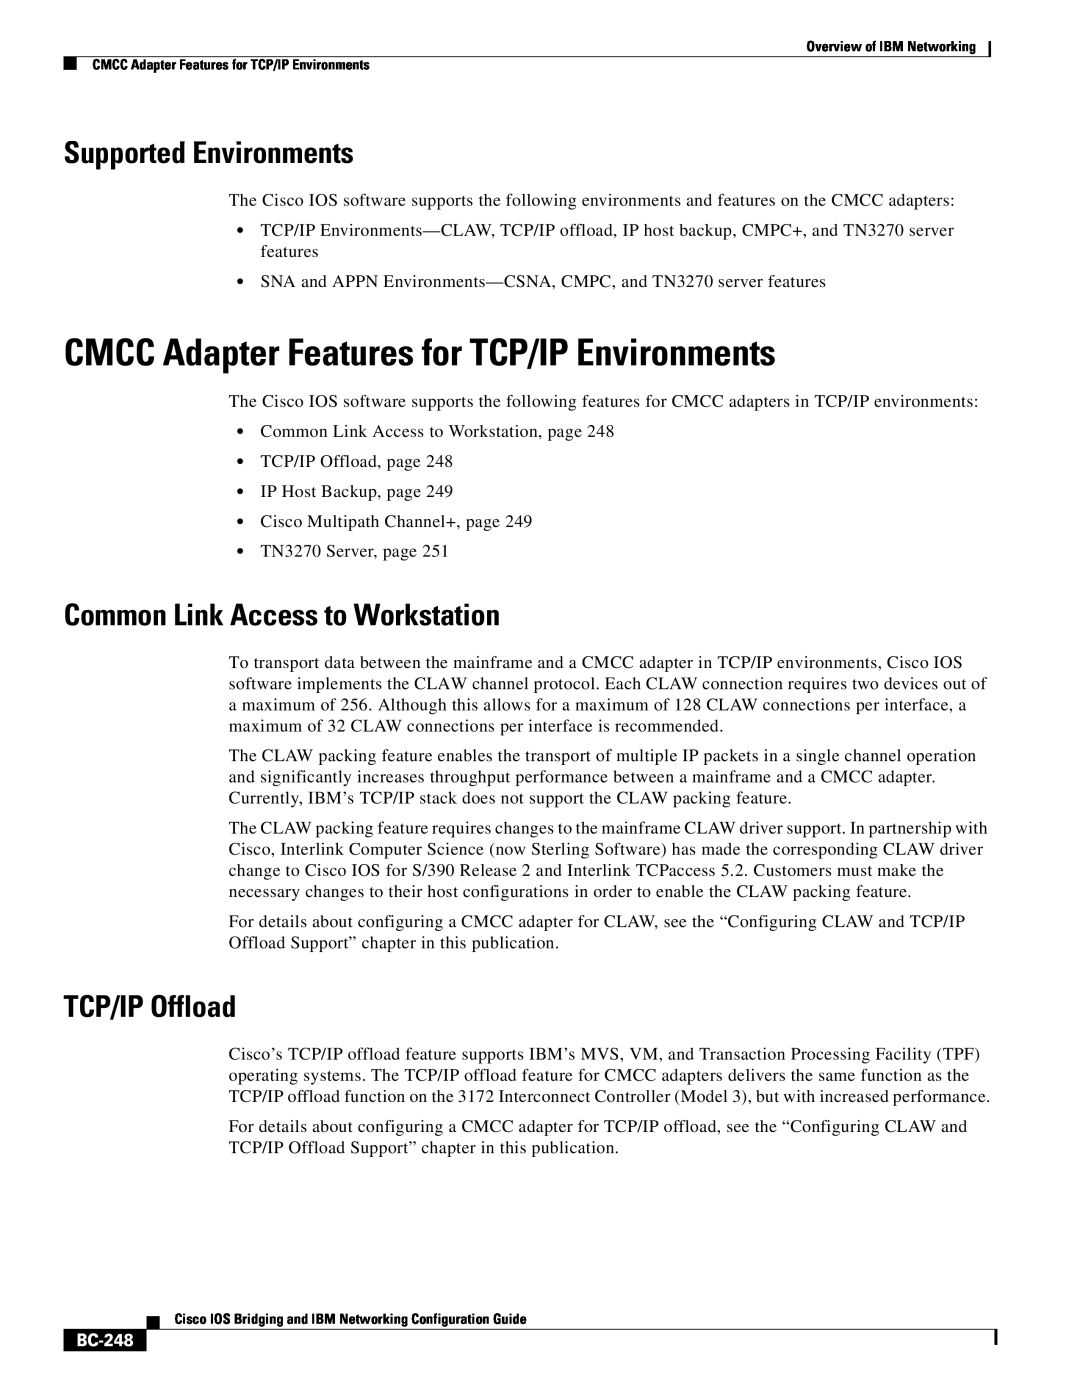 IBM BC-203 manual CMCC Adapter Features for TCP/IP Environments, Supported Environments, Common Link Access to Workstation 